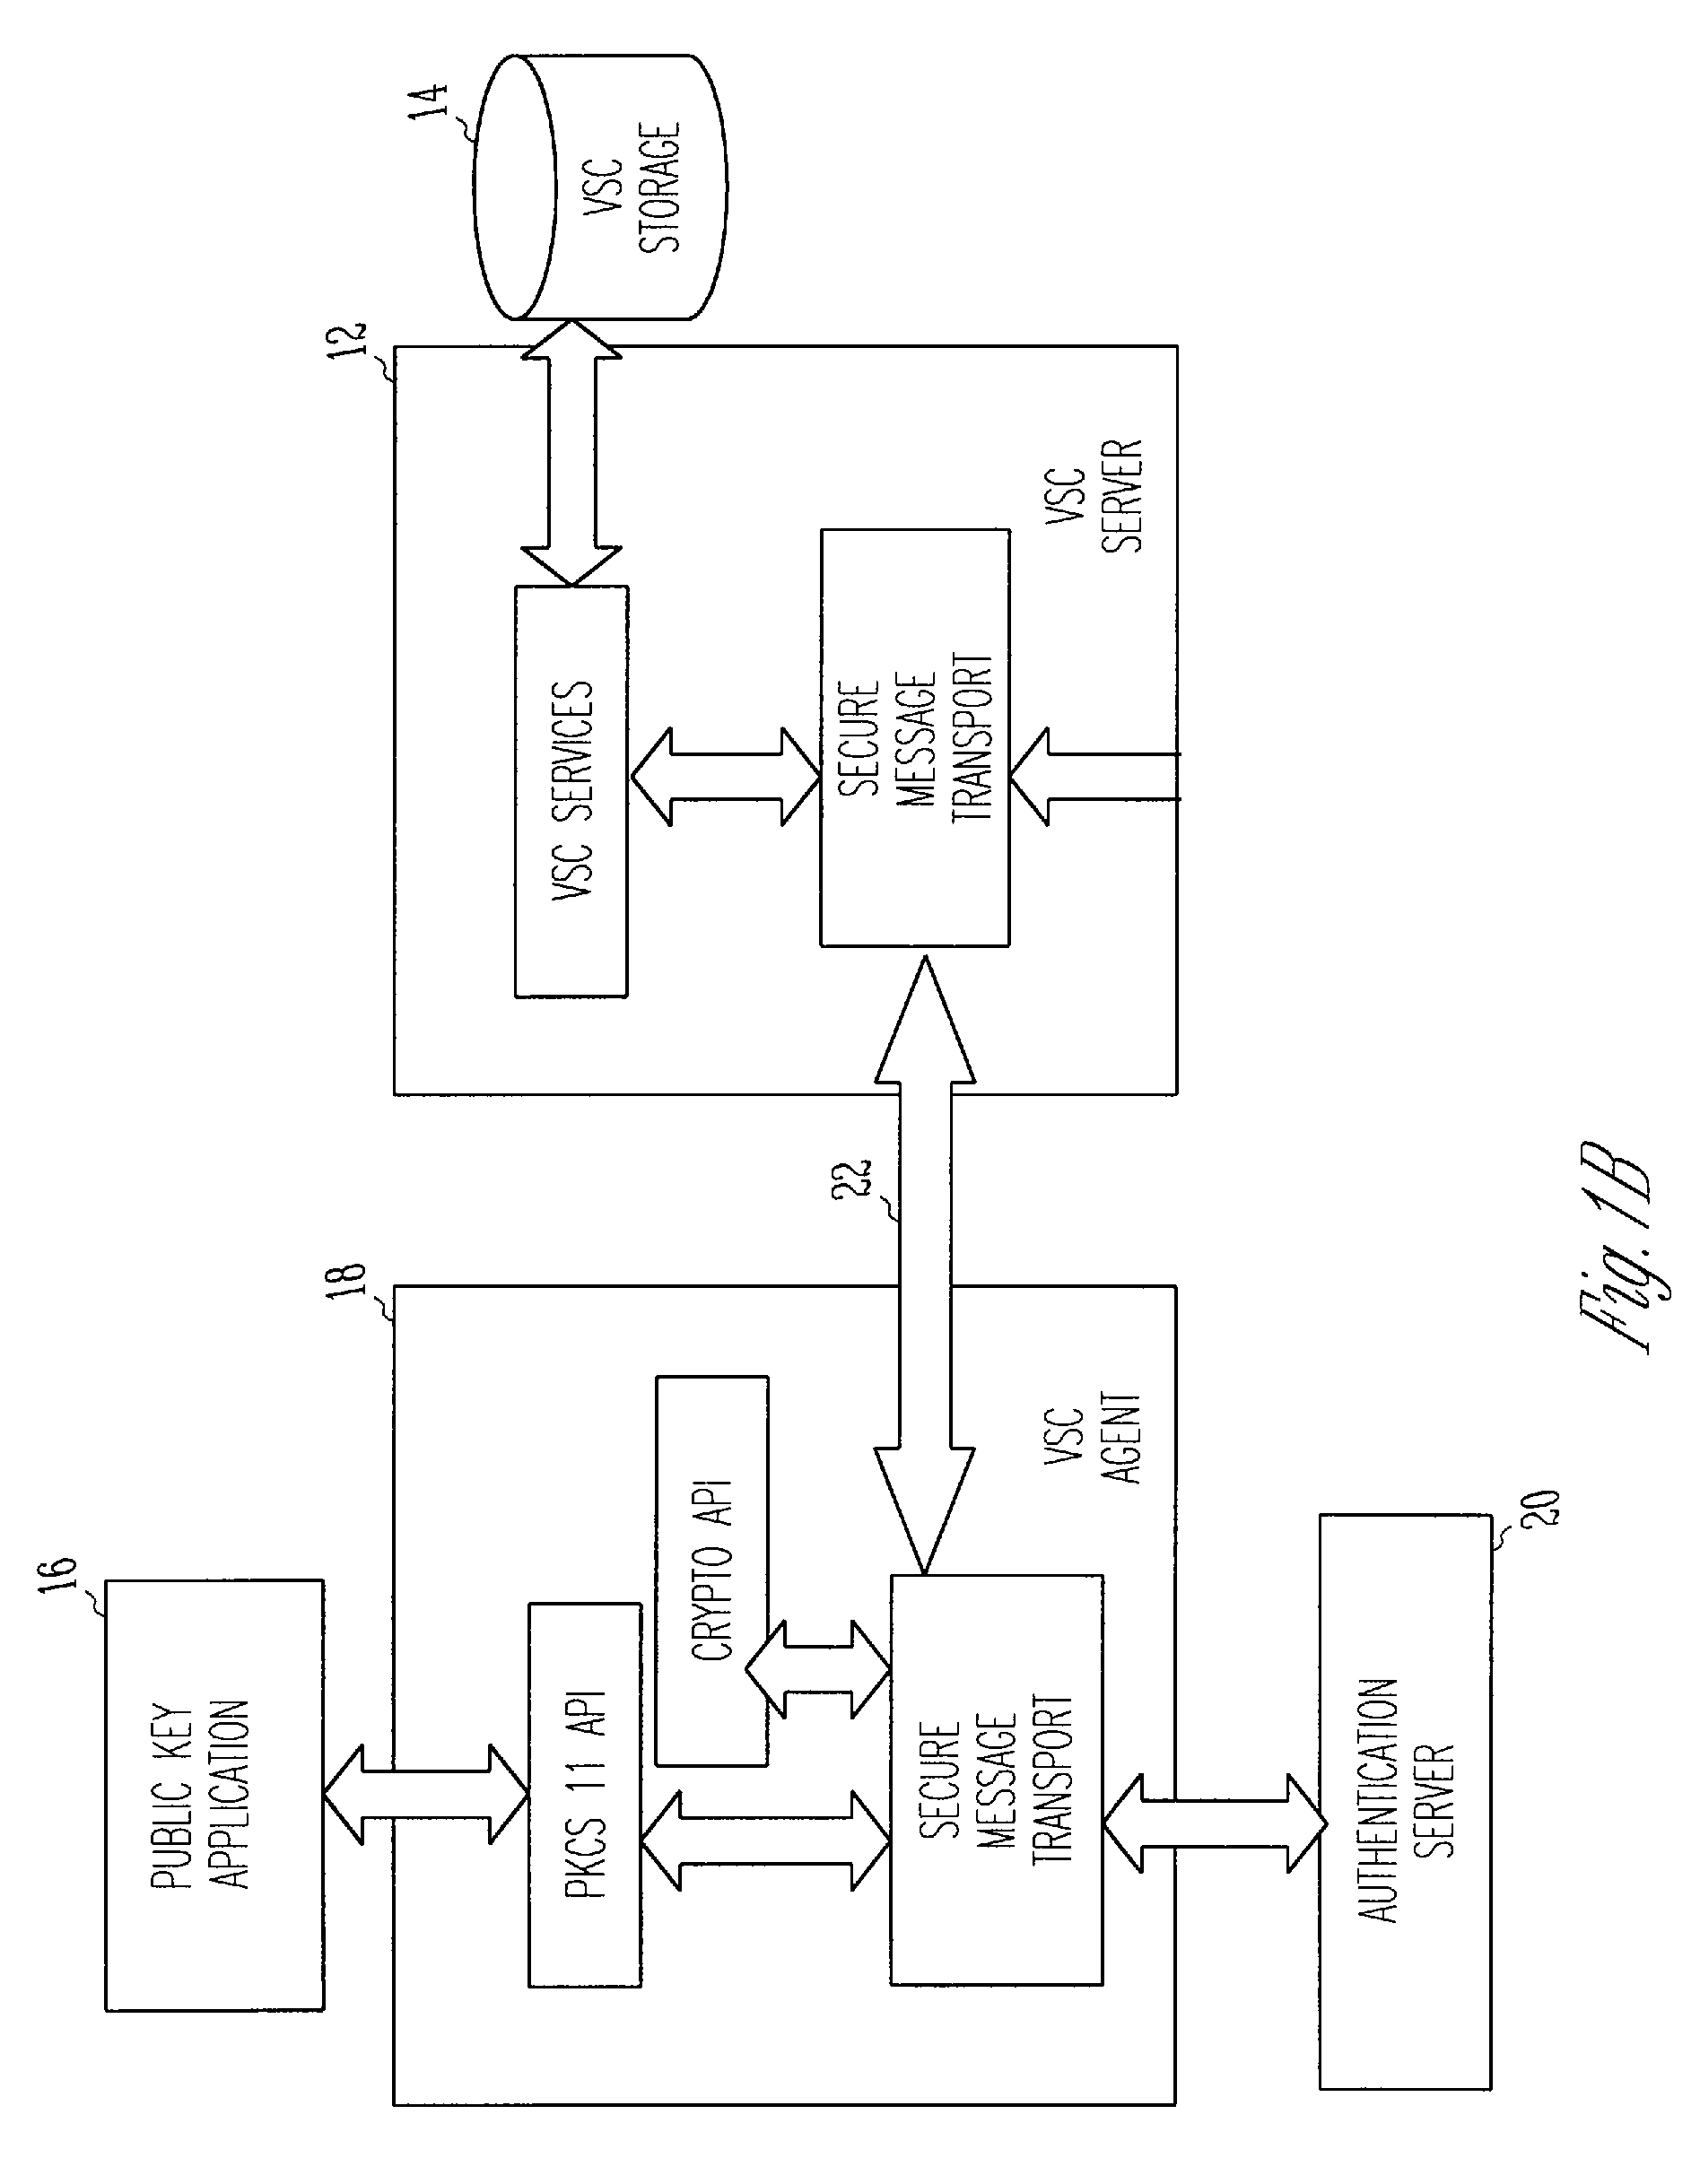 Virtual smart card system and method